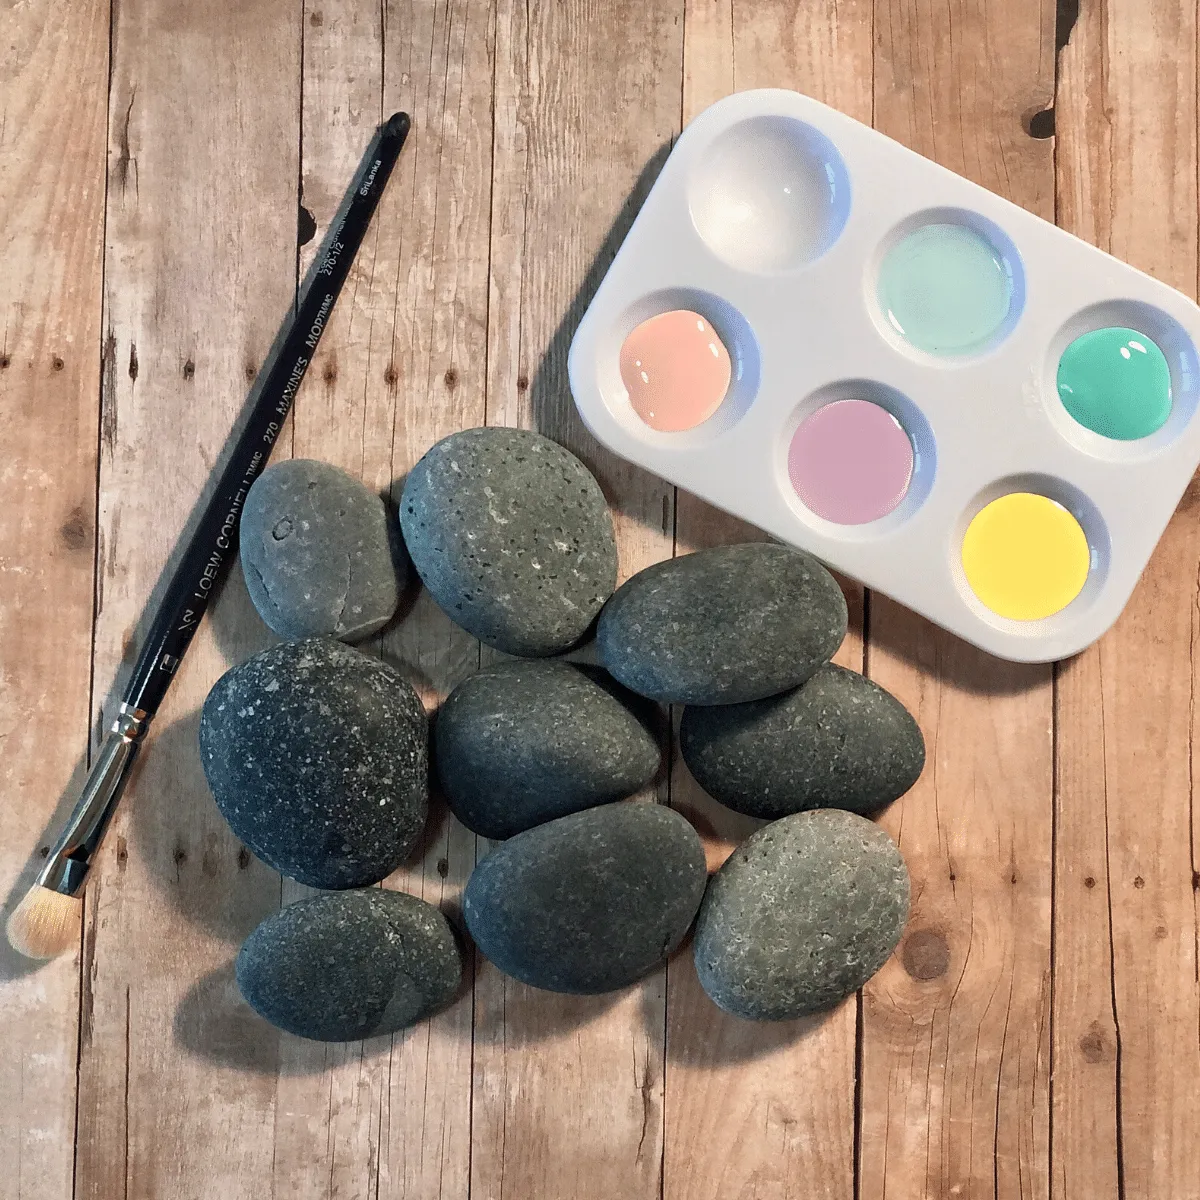 11 Best Places to Find Perfect Rocks for Painting - Carla Schauer Designs